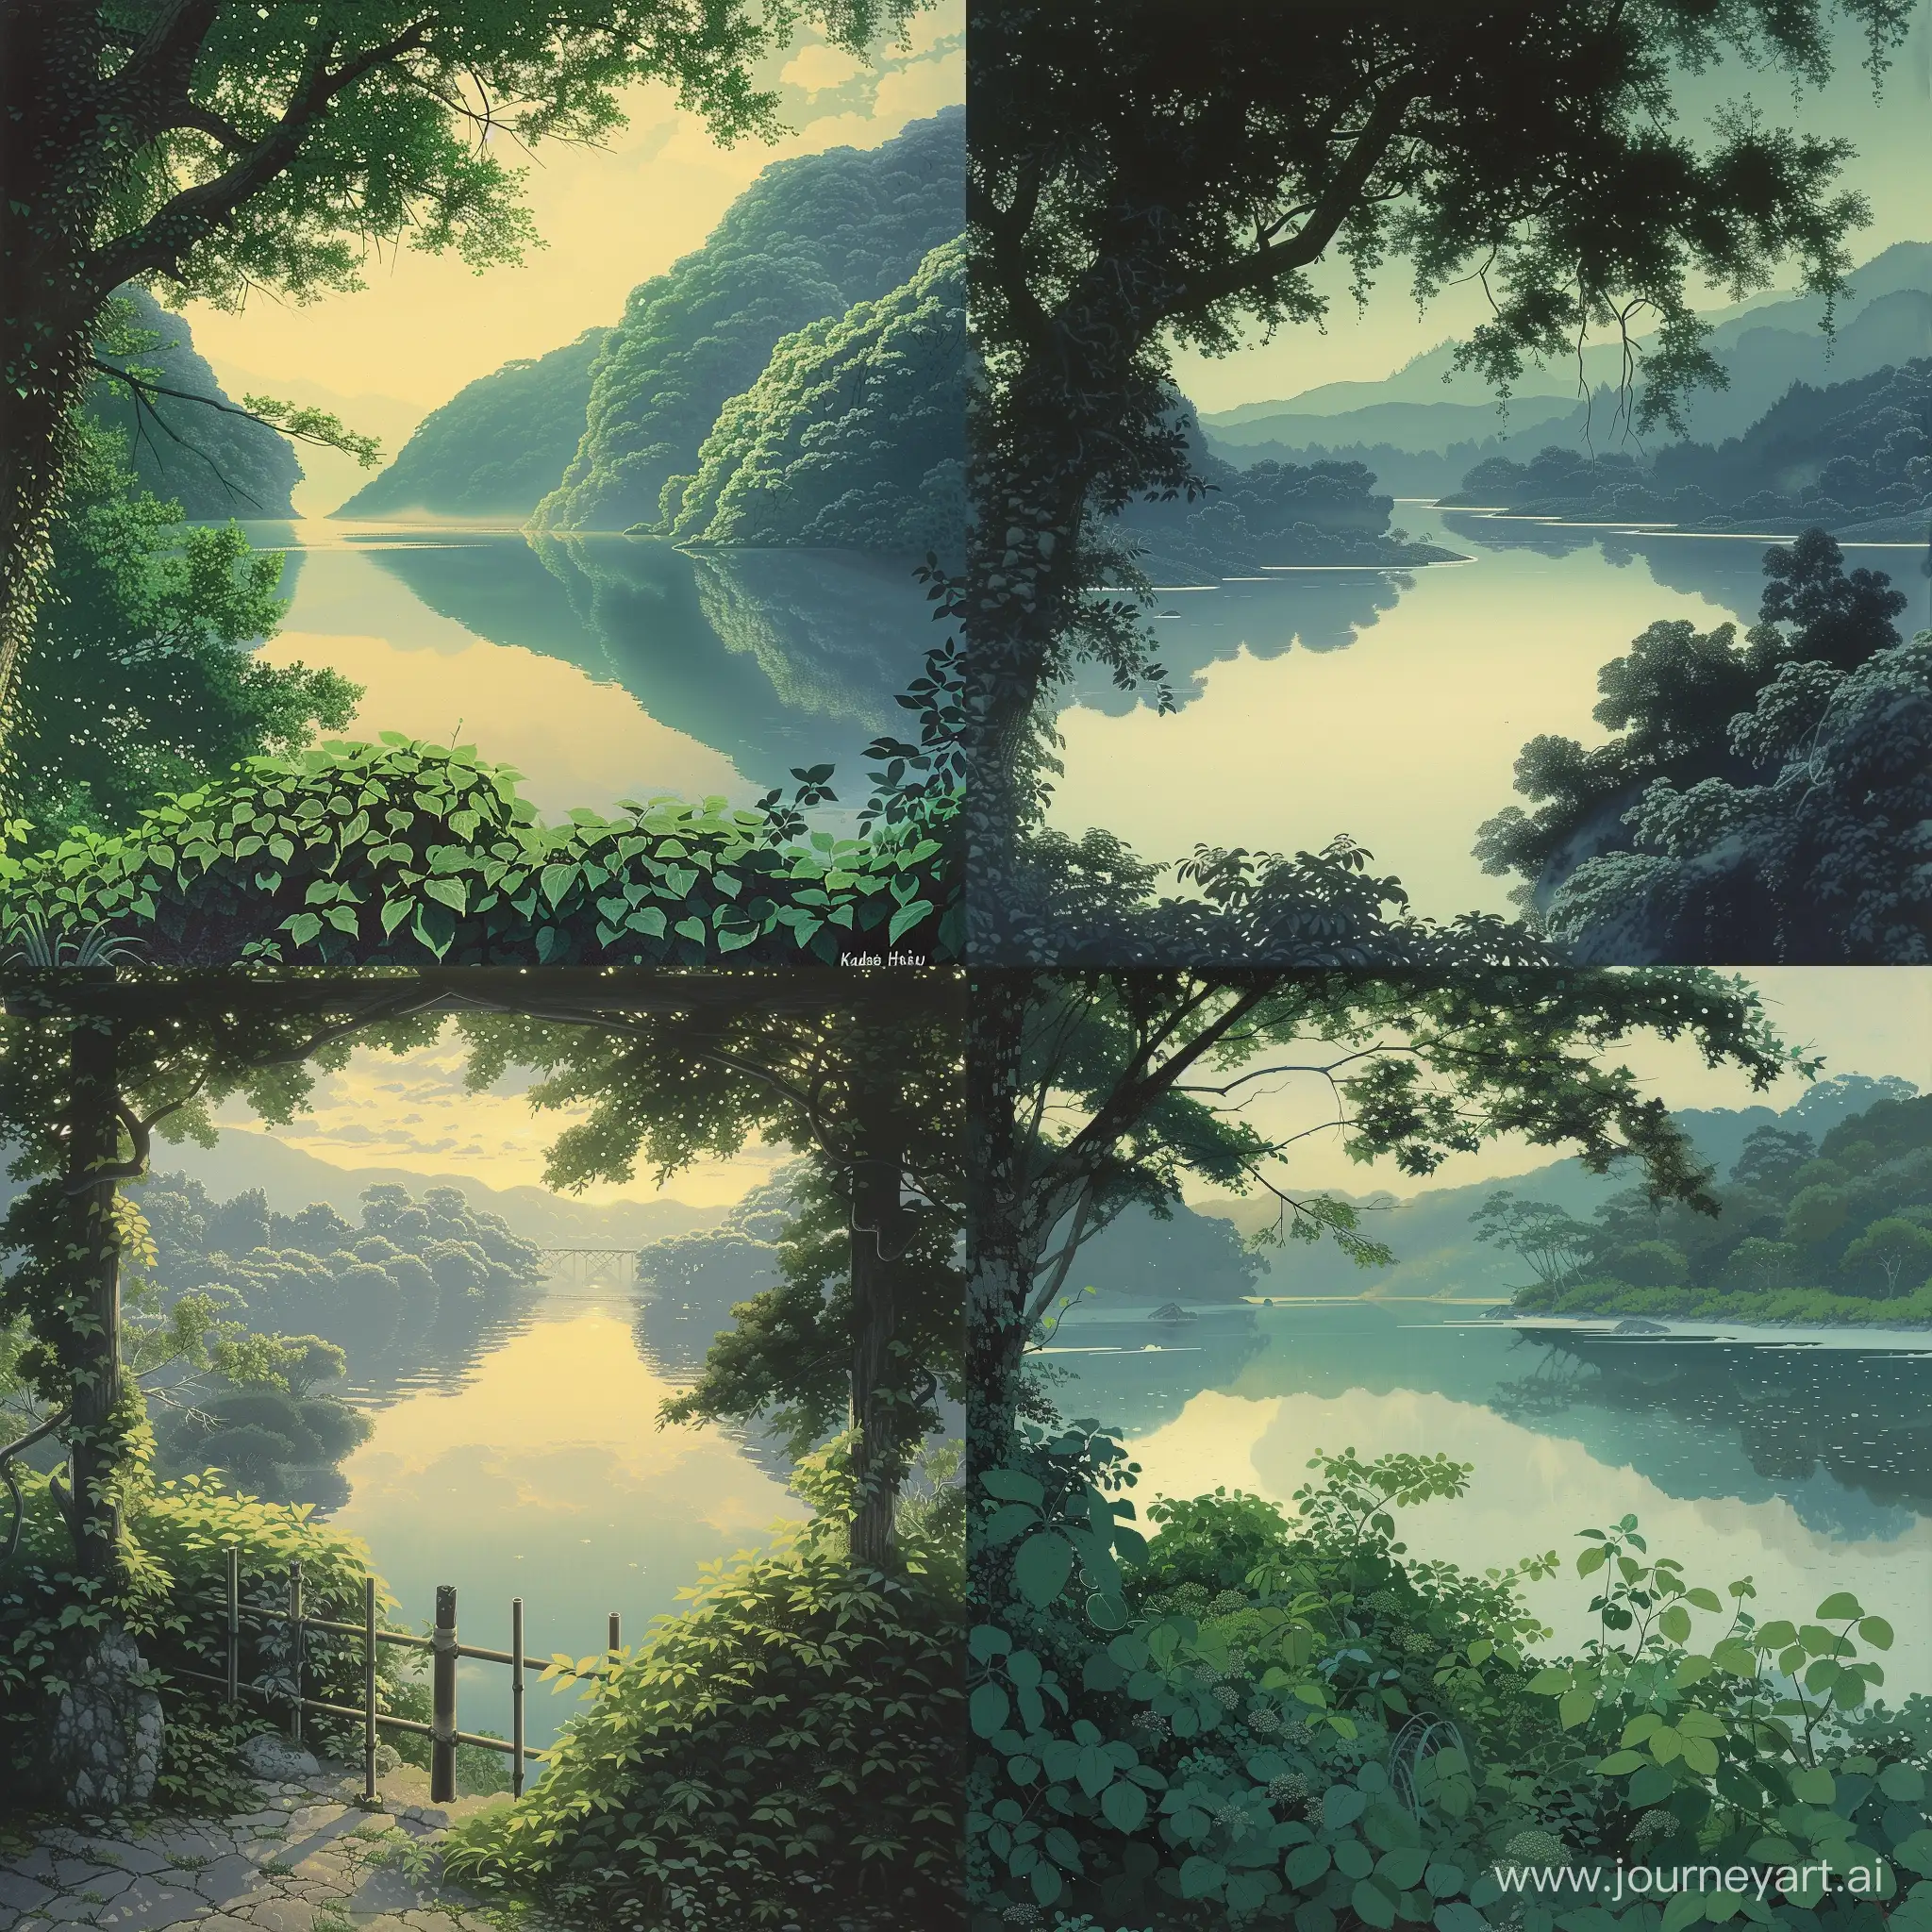 In this stunning artwork titled "Dawn over Lake Shoji" by Kawase Hasui, we are presented with a serene and picturesque scene. The painting depicts a tranquil lake surrounded by lush greenery, with the soft light of dawn illuminating the landscape. The artist skillfully captures the mood and atmosphere of the moment, creating a sense of calmness and harmony. The play of light and shadow adds depth and dimension to the composition, while the delicate brushstrokes and vibrant colors bring the scenery to life. 

